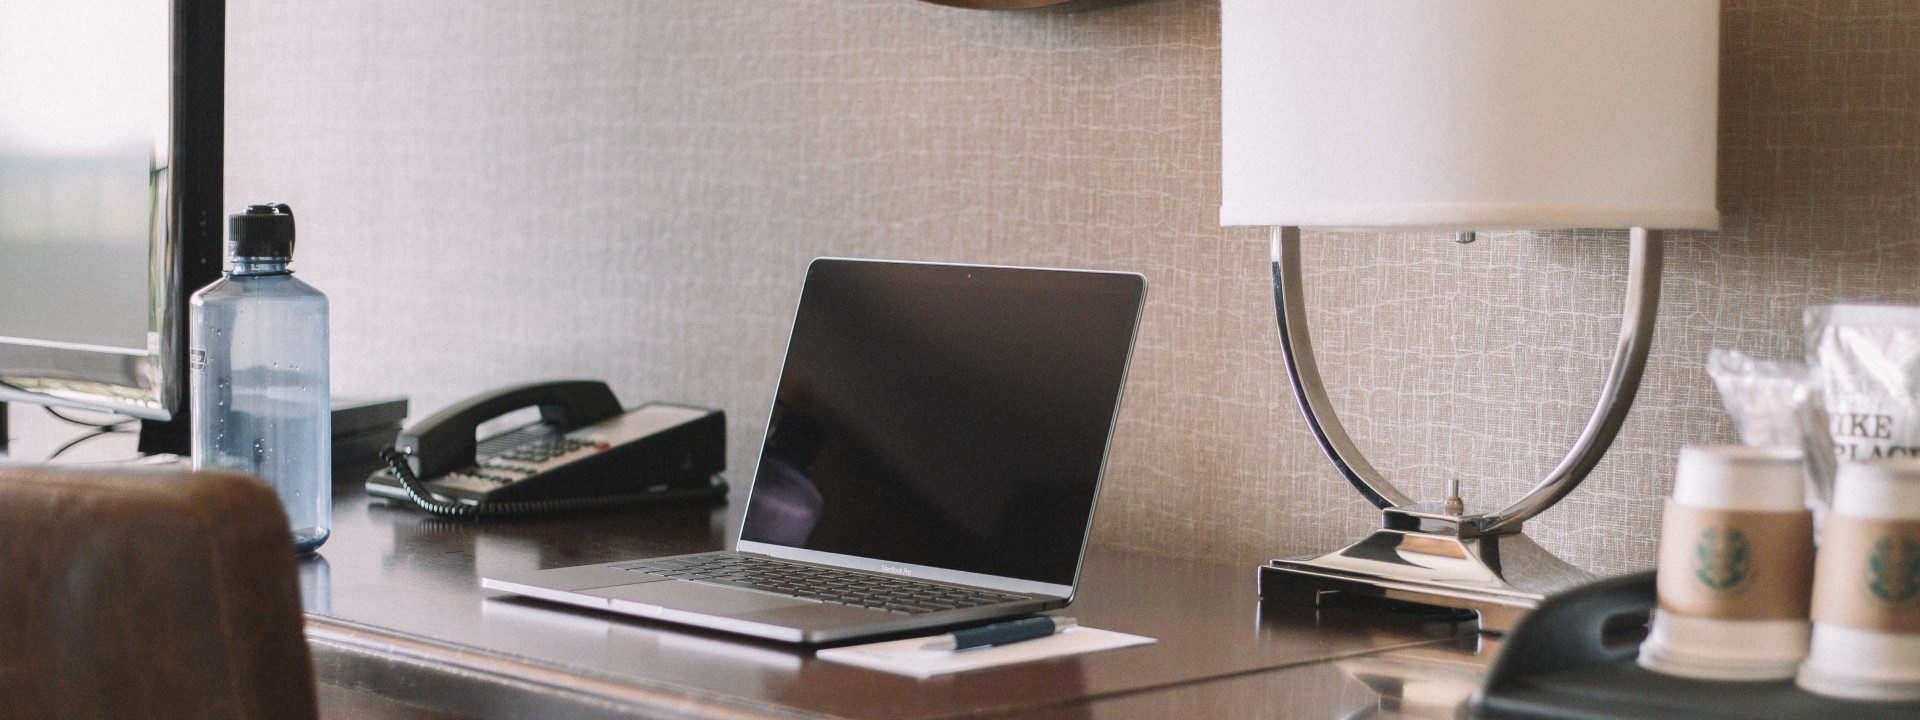 Rest in peace: Lamenting the disappearance of hotel room desks